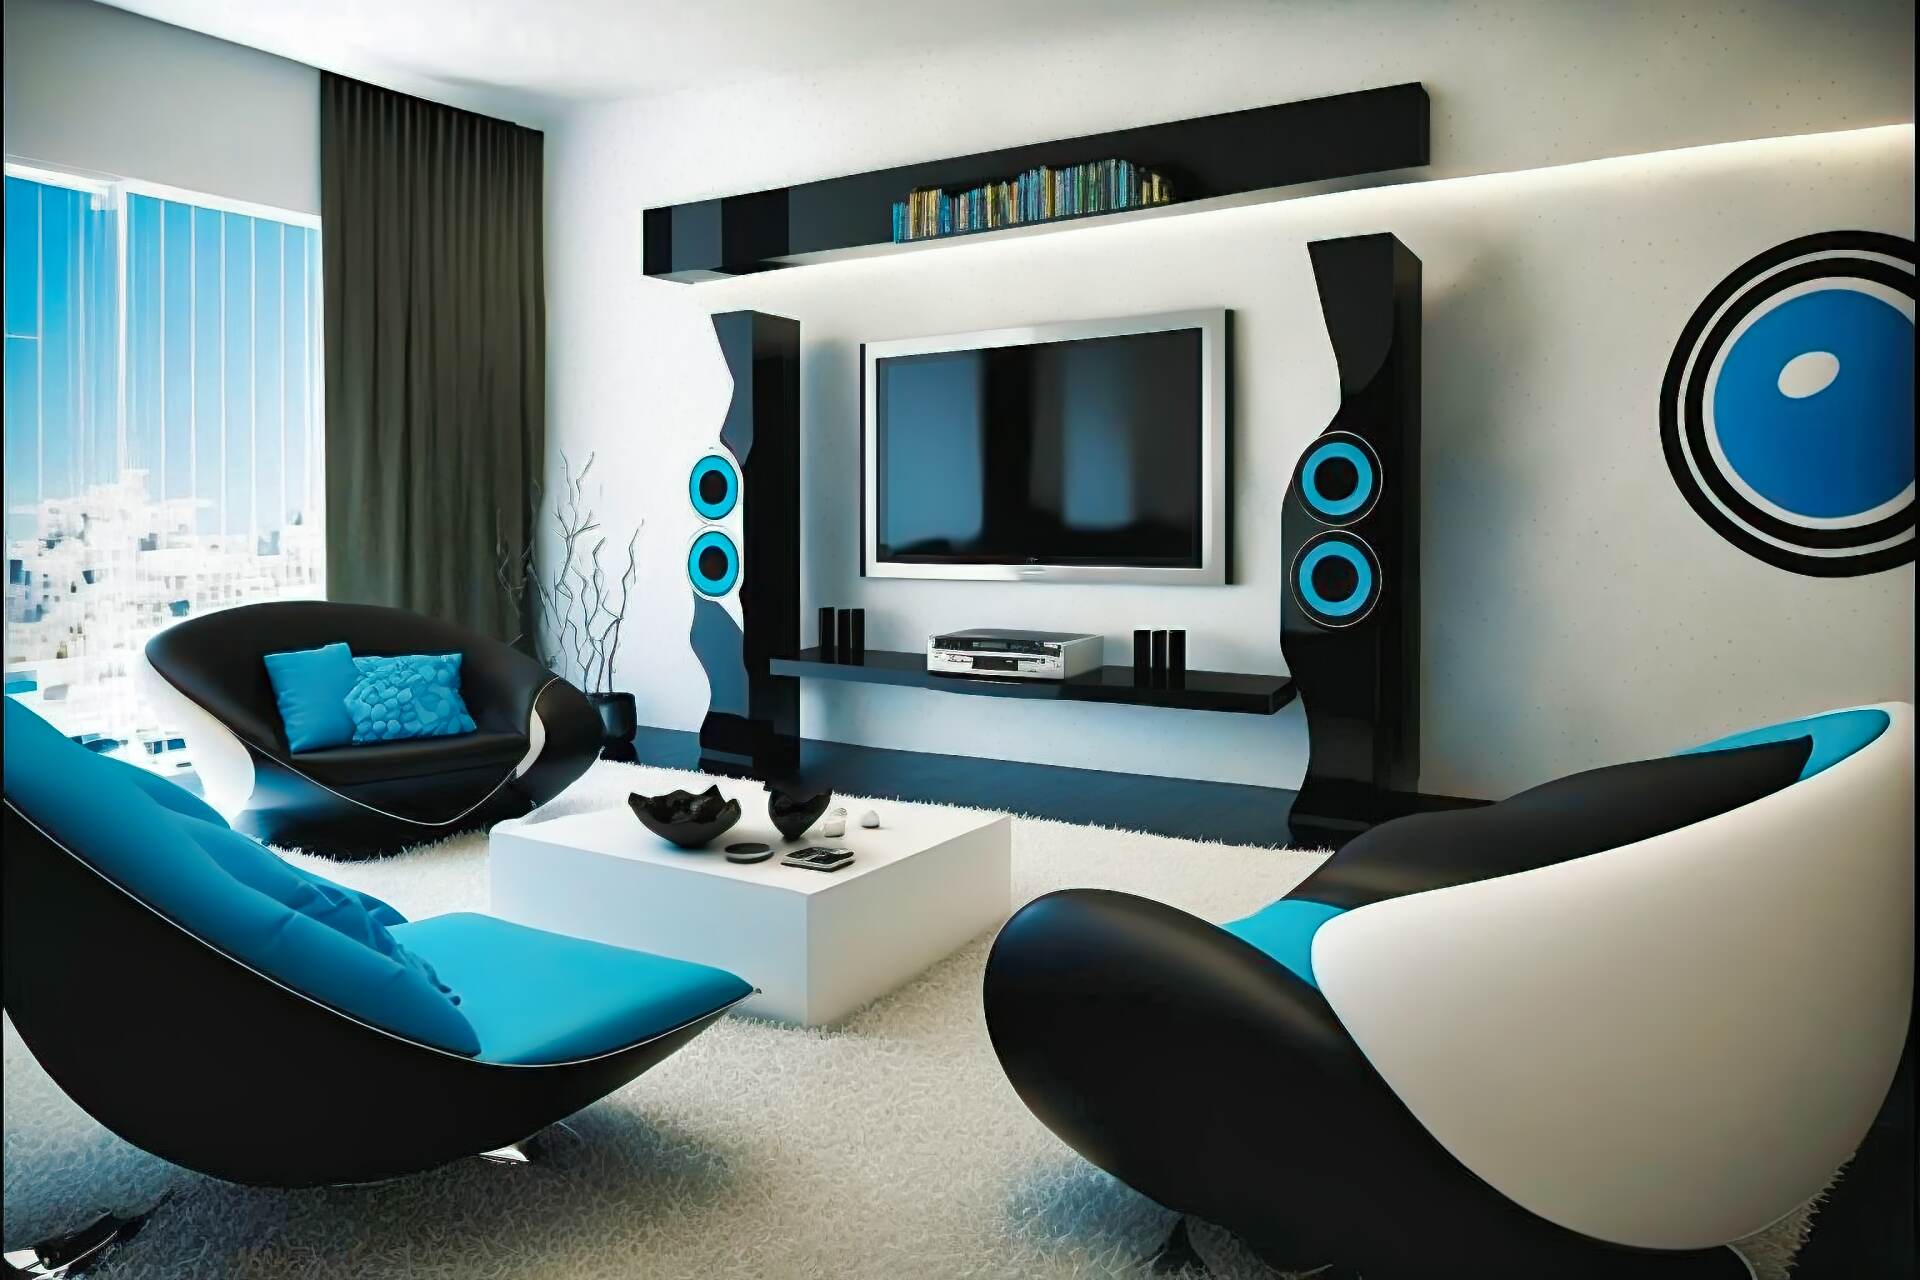 A Sleek, Black Futuristic Living Room With Accents Of Bright Blue And White. In The Center Is A Black, Wall-Mounted Tv With A Floating Shelf Beneath It To Hold The Dvd Player, Game Consoles And Other Tech. Sleek White Armchairs And A Long Black Sofa Provide Plenty Of Seating. Brightly Coloured Throw Pillows In Blue And White Add A Pop Of Colour. A Modern, Wall-Mounted Fireplace Adds A Cozy Feel.